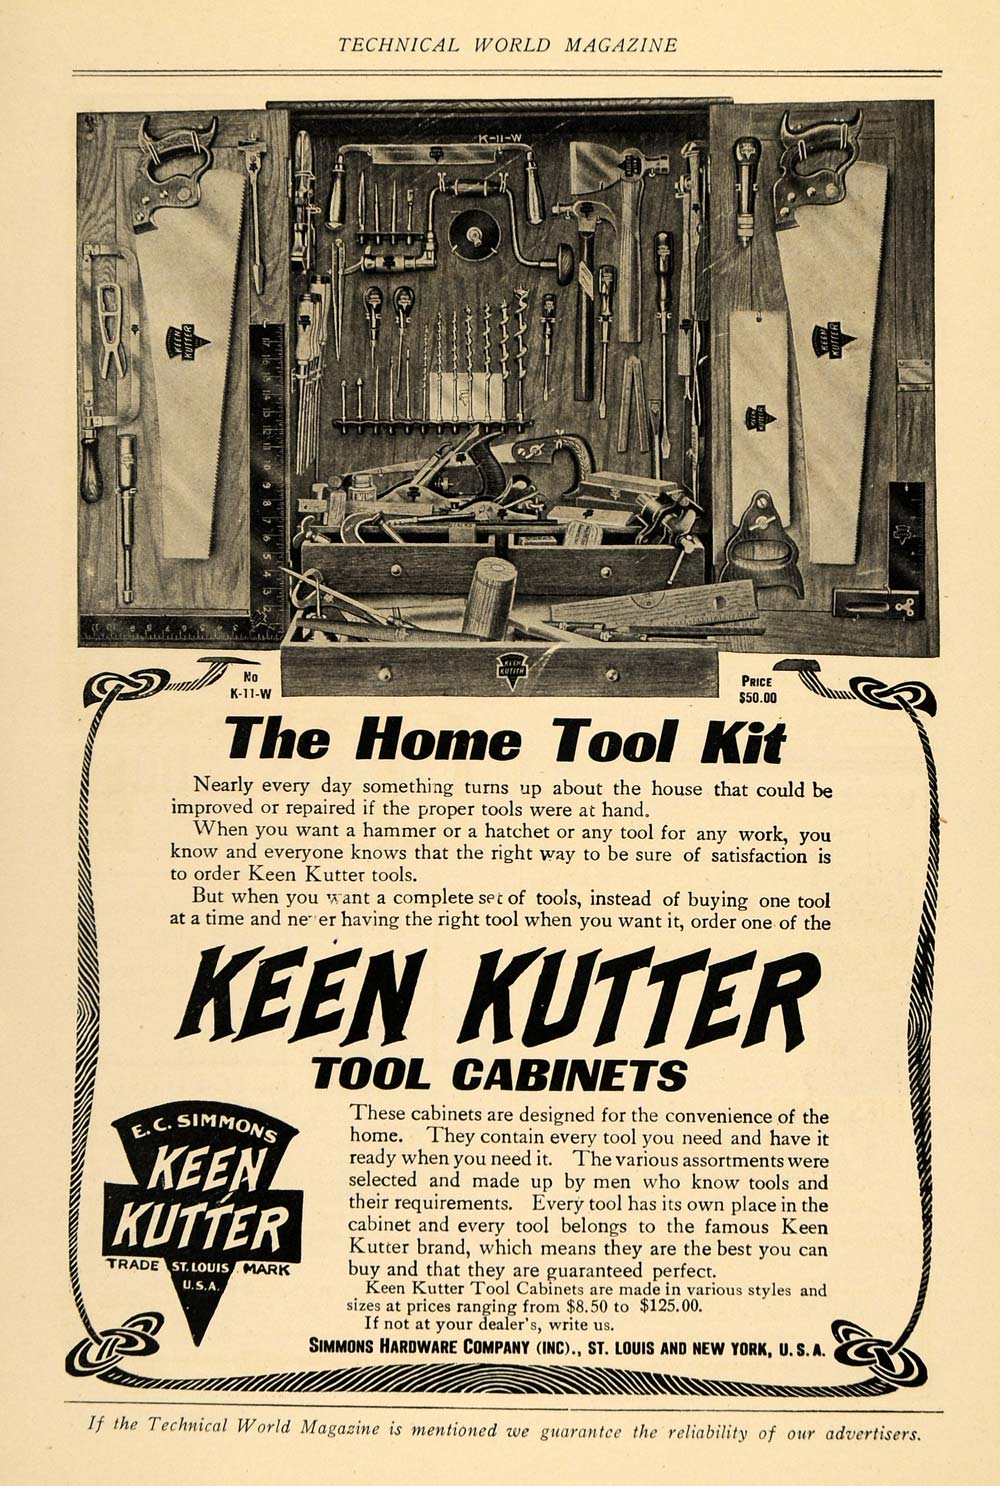 1908 Ad Simmons Hardware Co. Keen Kutter Home Tool Kit - ORIGINAL TW3